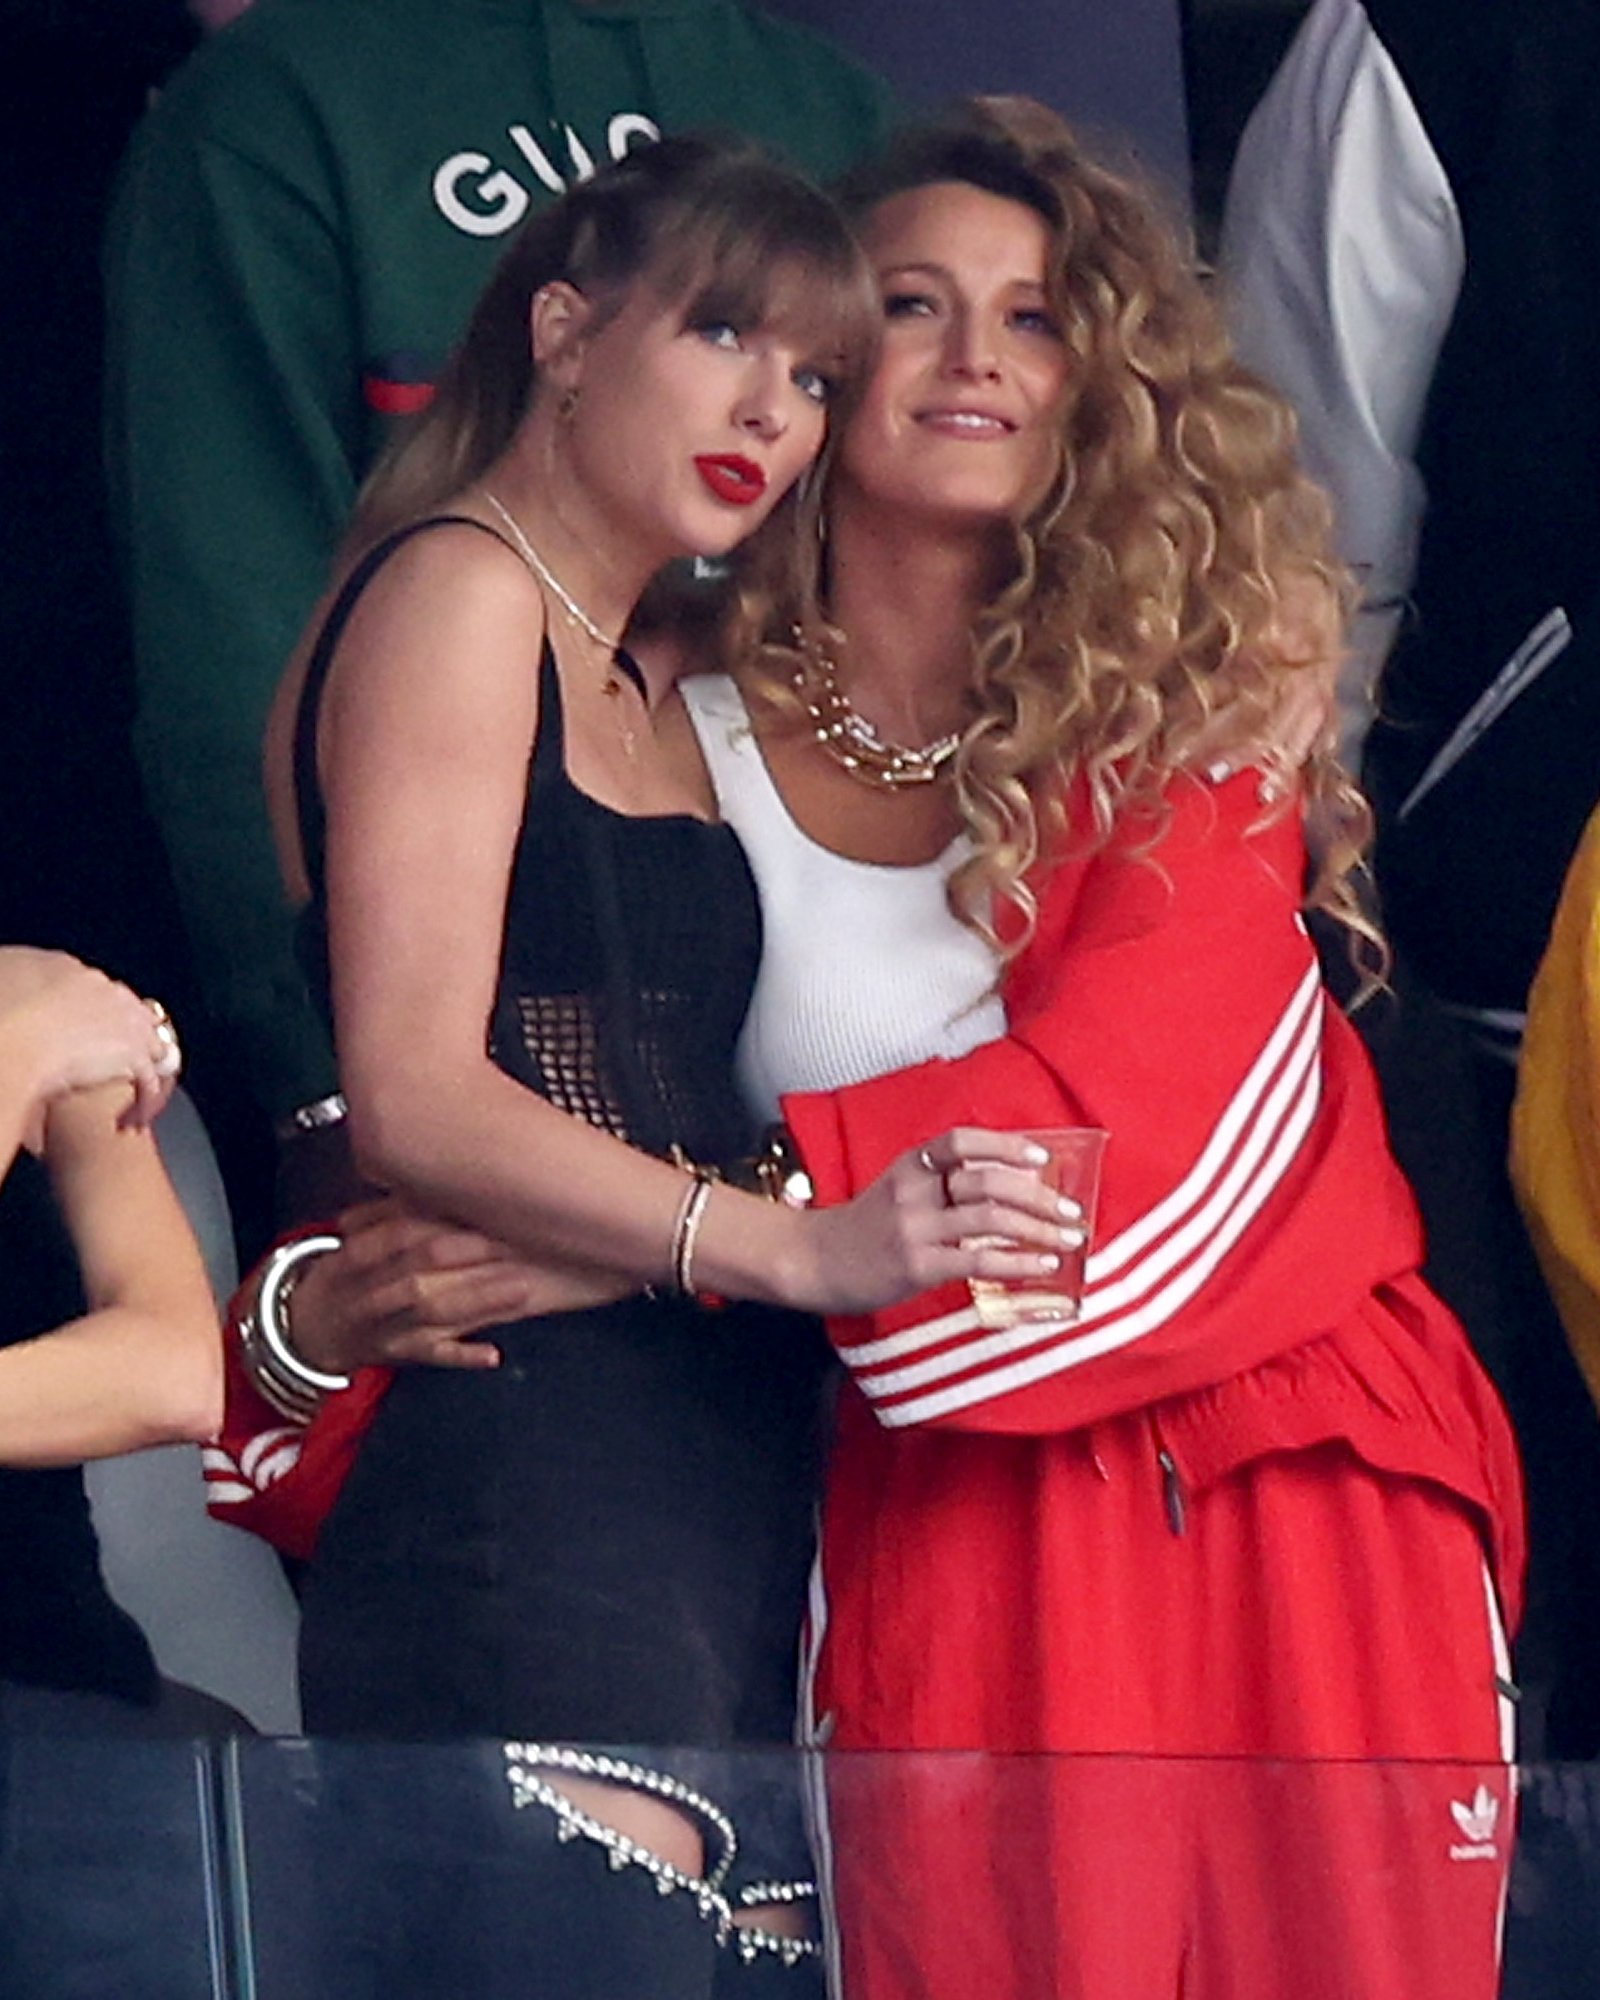 Taylor Swift and Blake Lively Are The Real Super Bowl MVPs